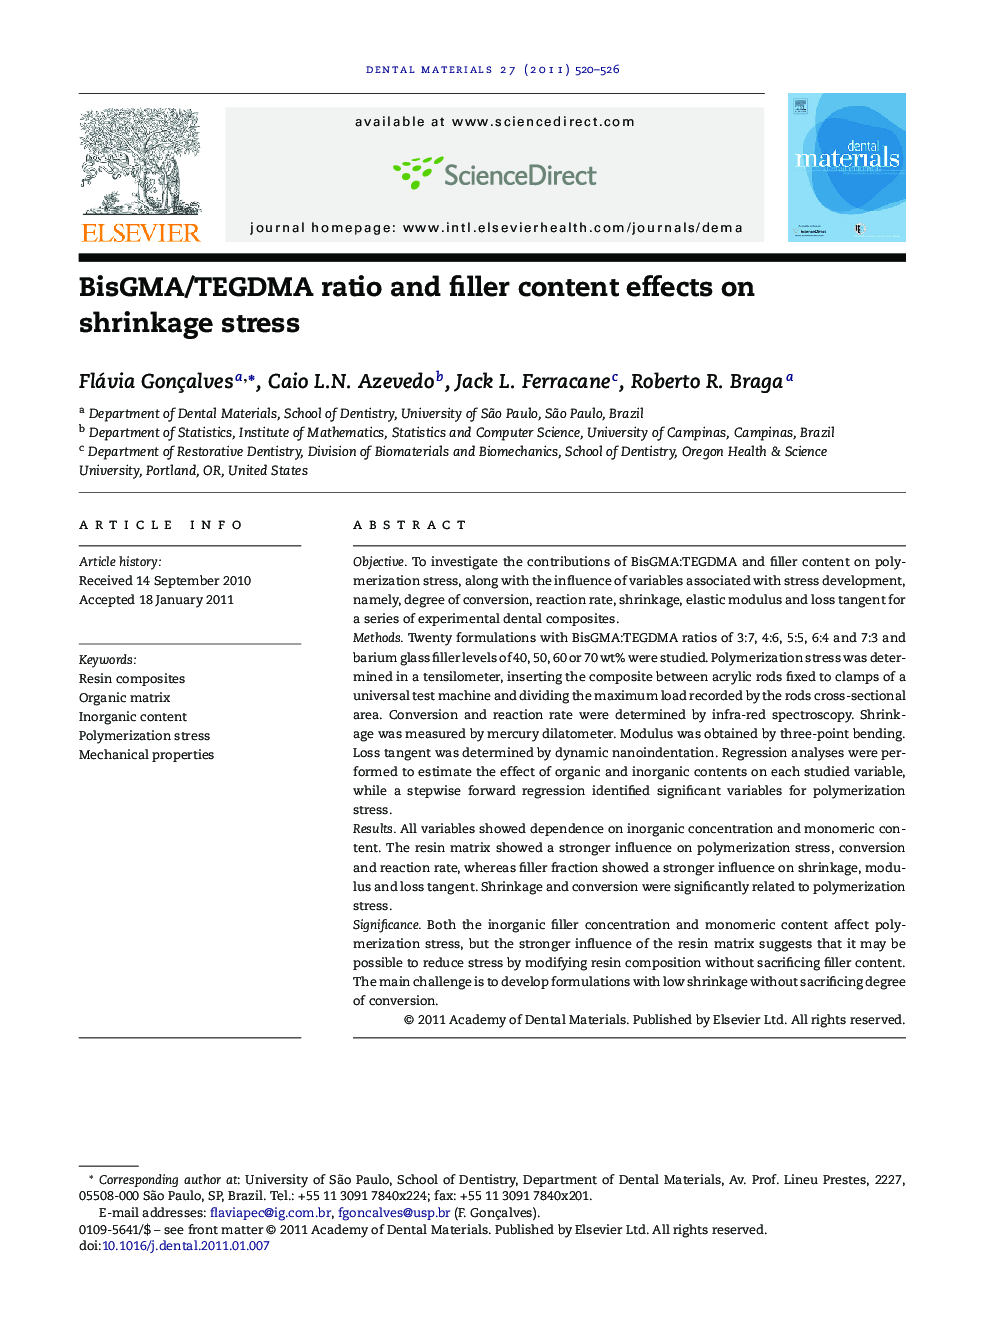 BisGMA/TEGDMA ratio and filler content effects on shrinkage stress